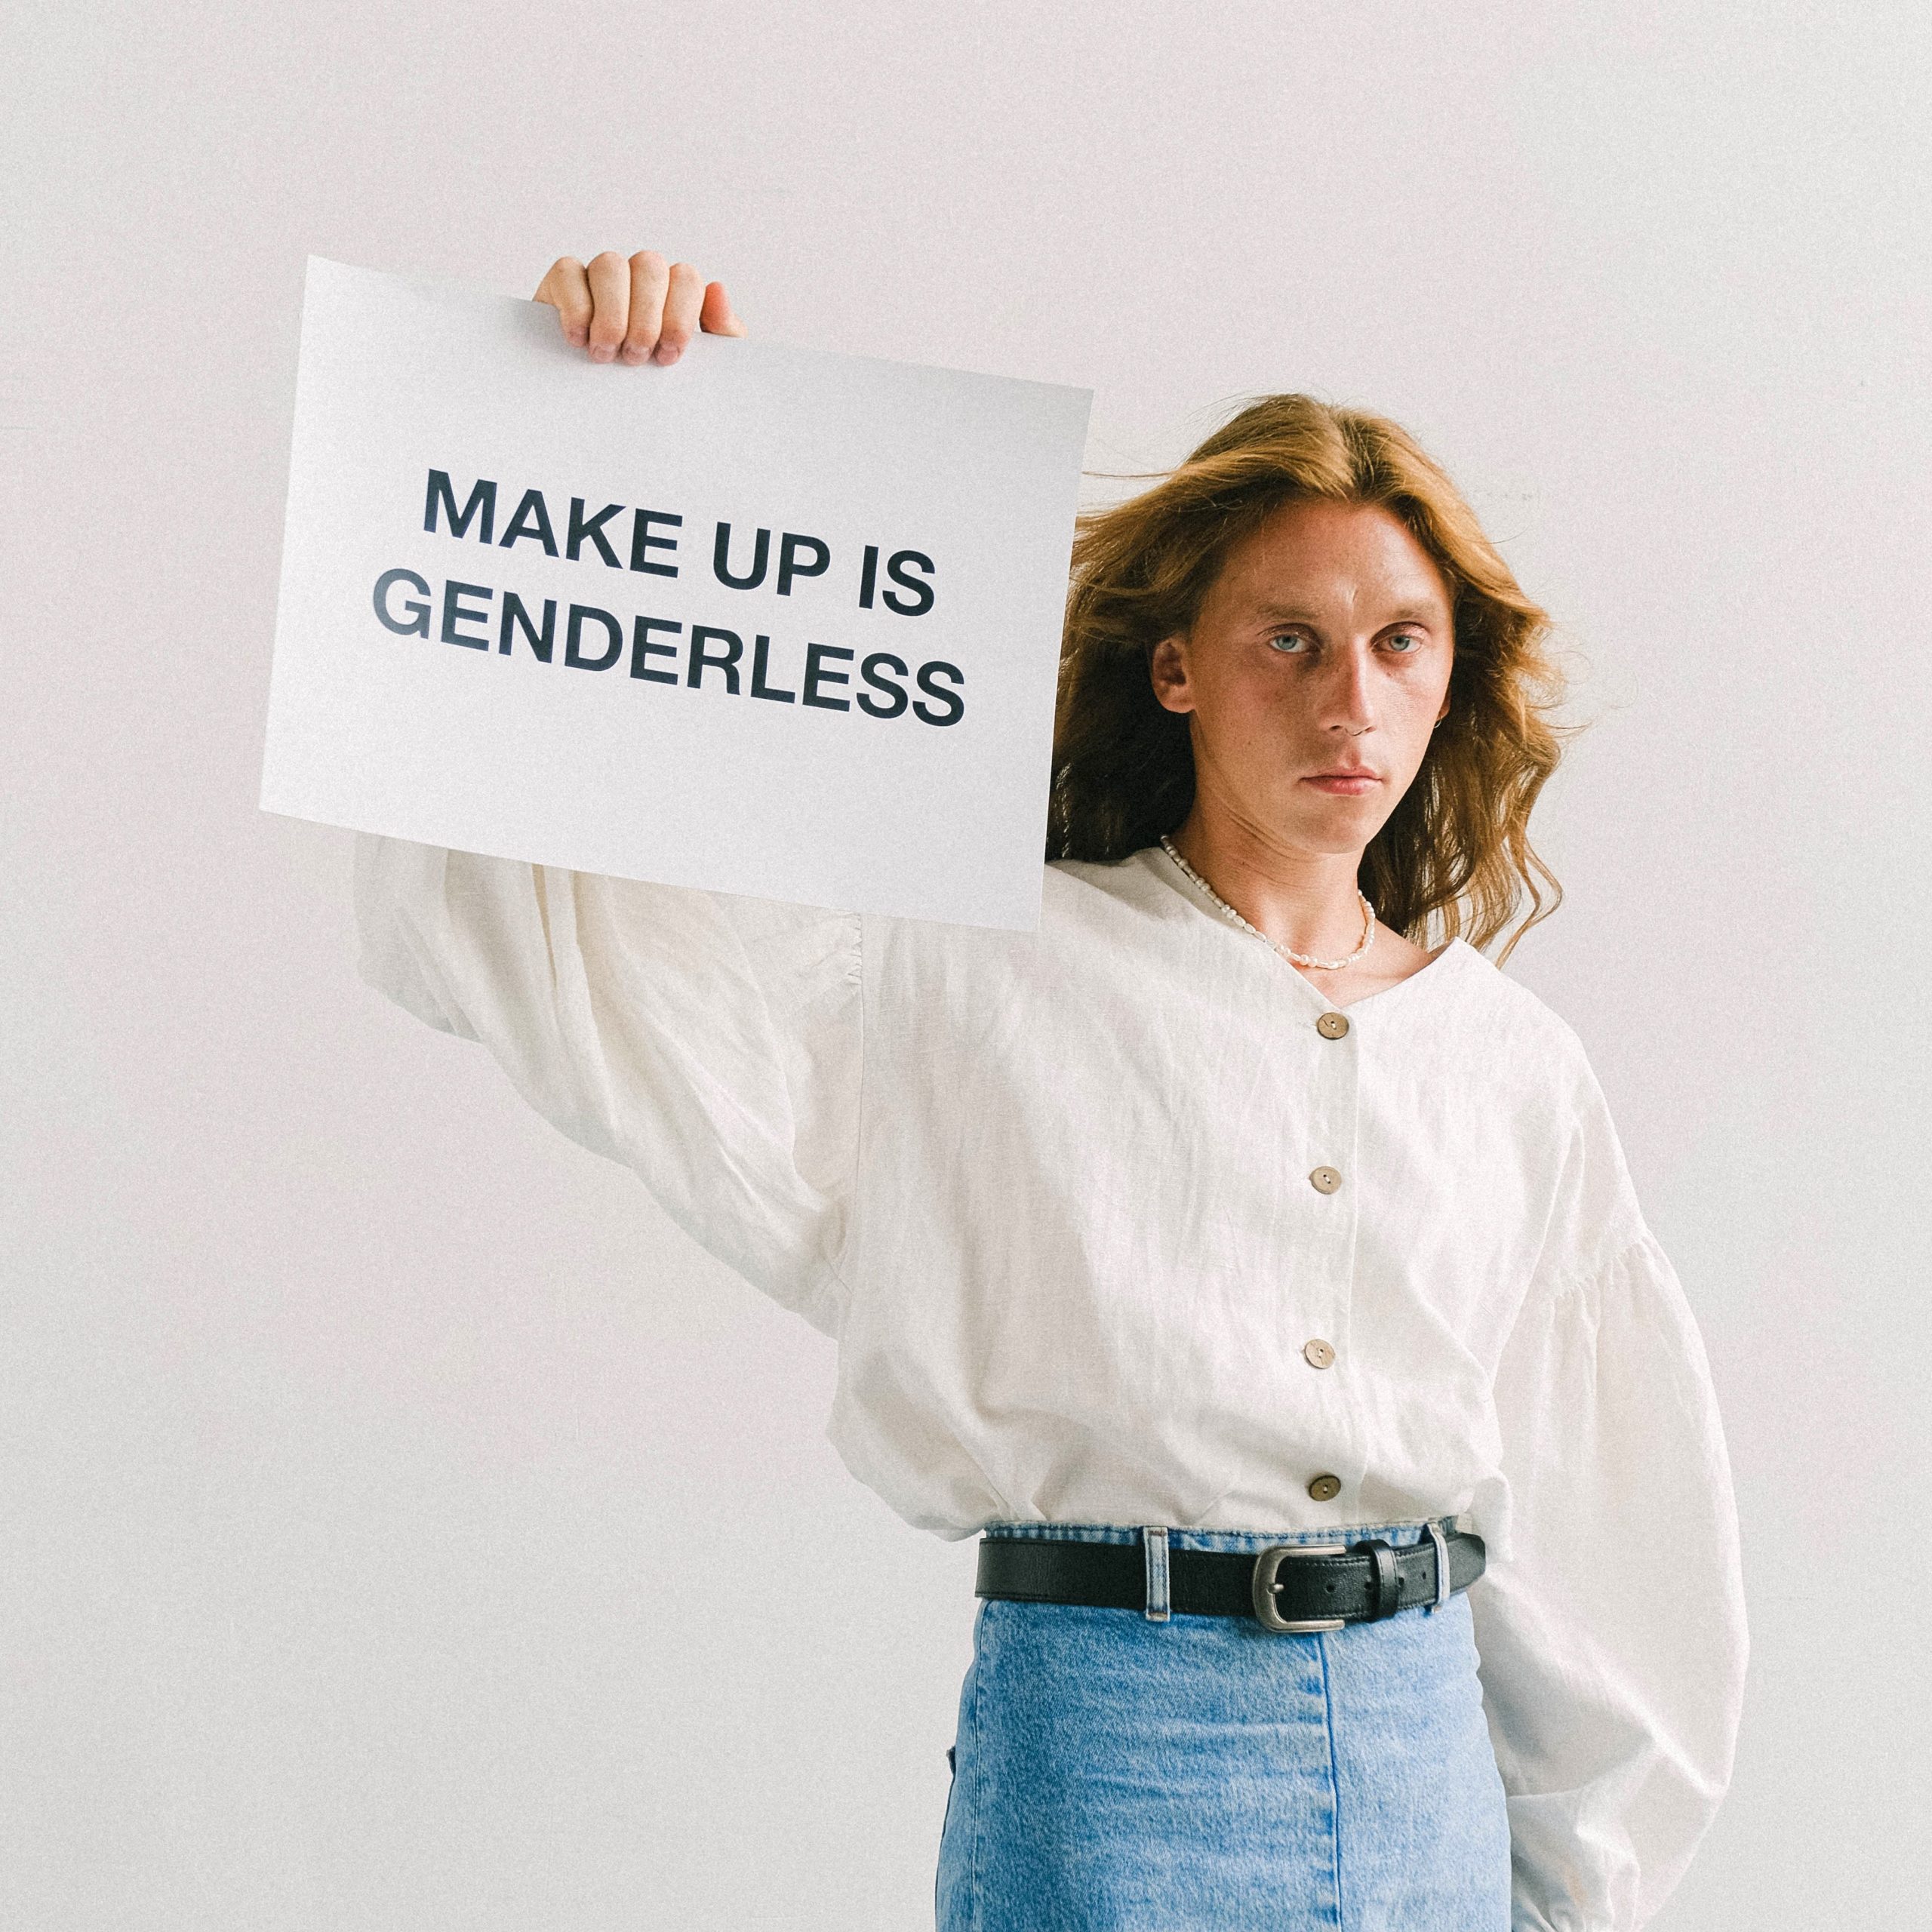 man wearing feminine clothing challenging gender norms and stereotypes